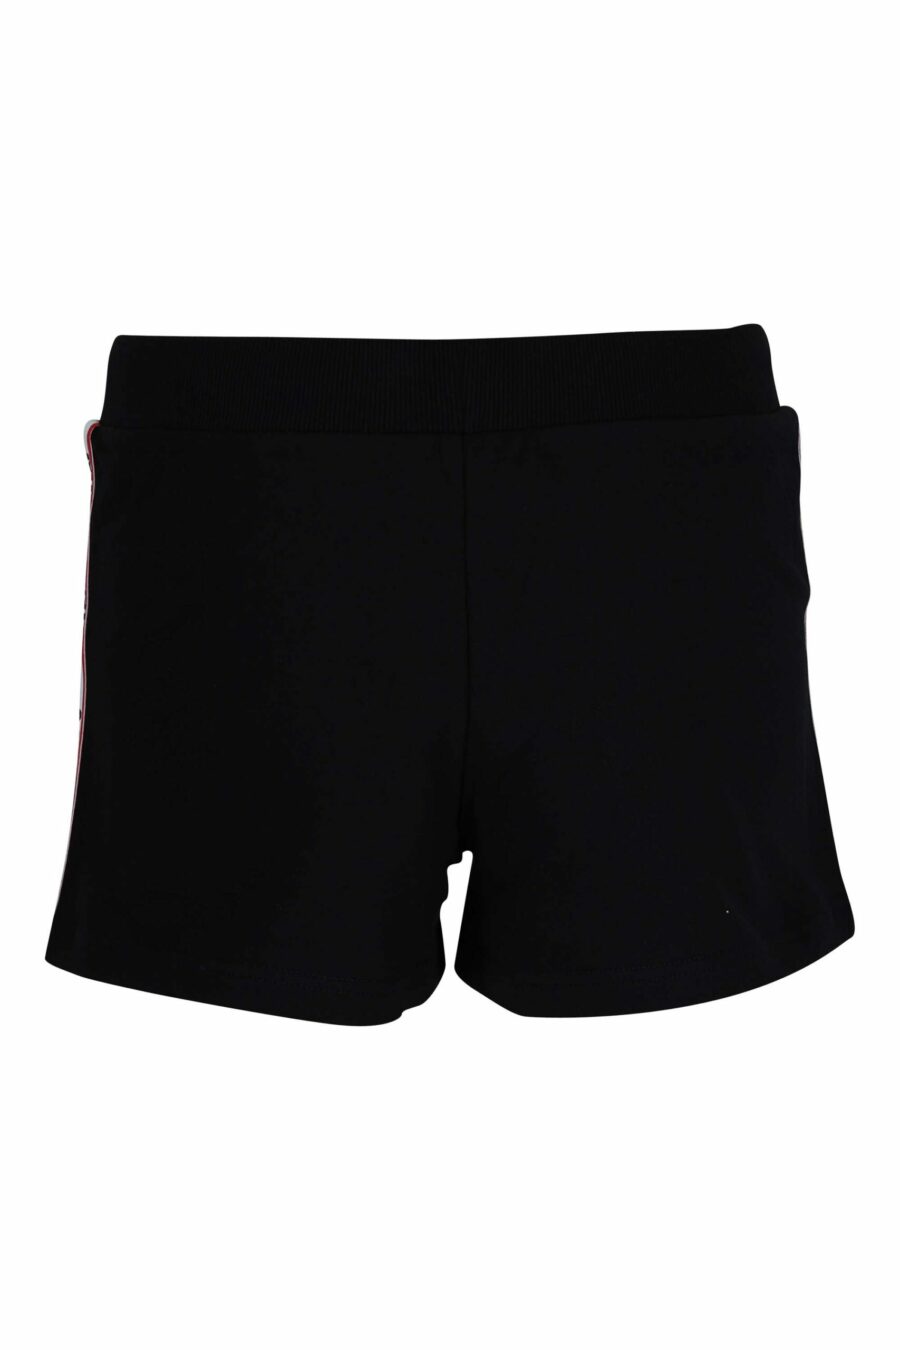 Black shorts with black ribbon logo with red side details - 667113353623 1 scaled